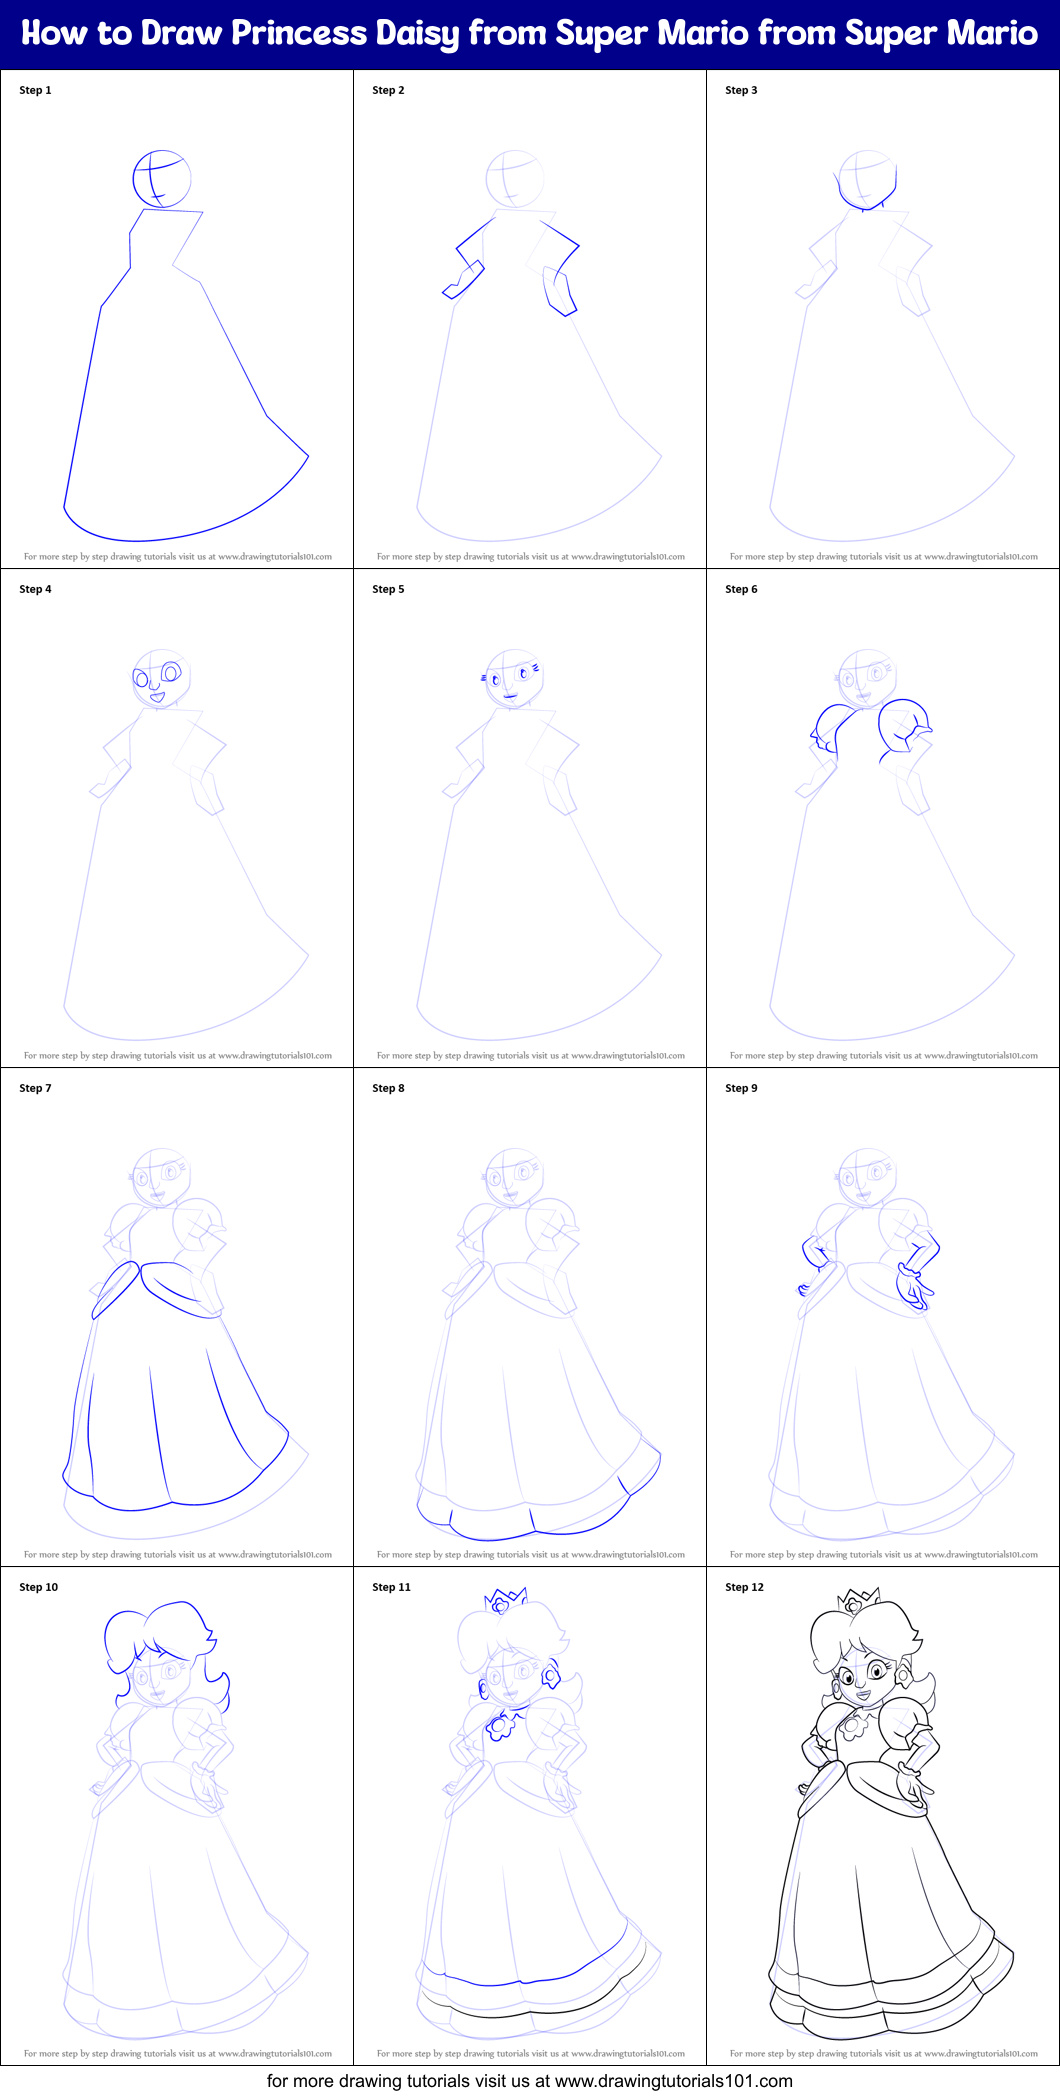 How to Draw Princess Daisy from Super Mario from Super Mario printable